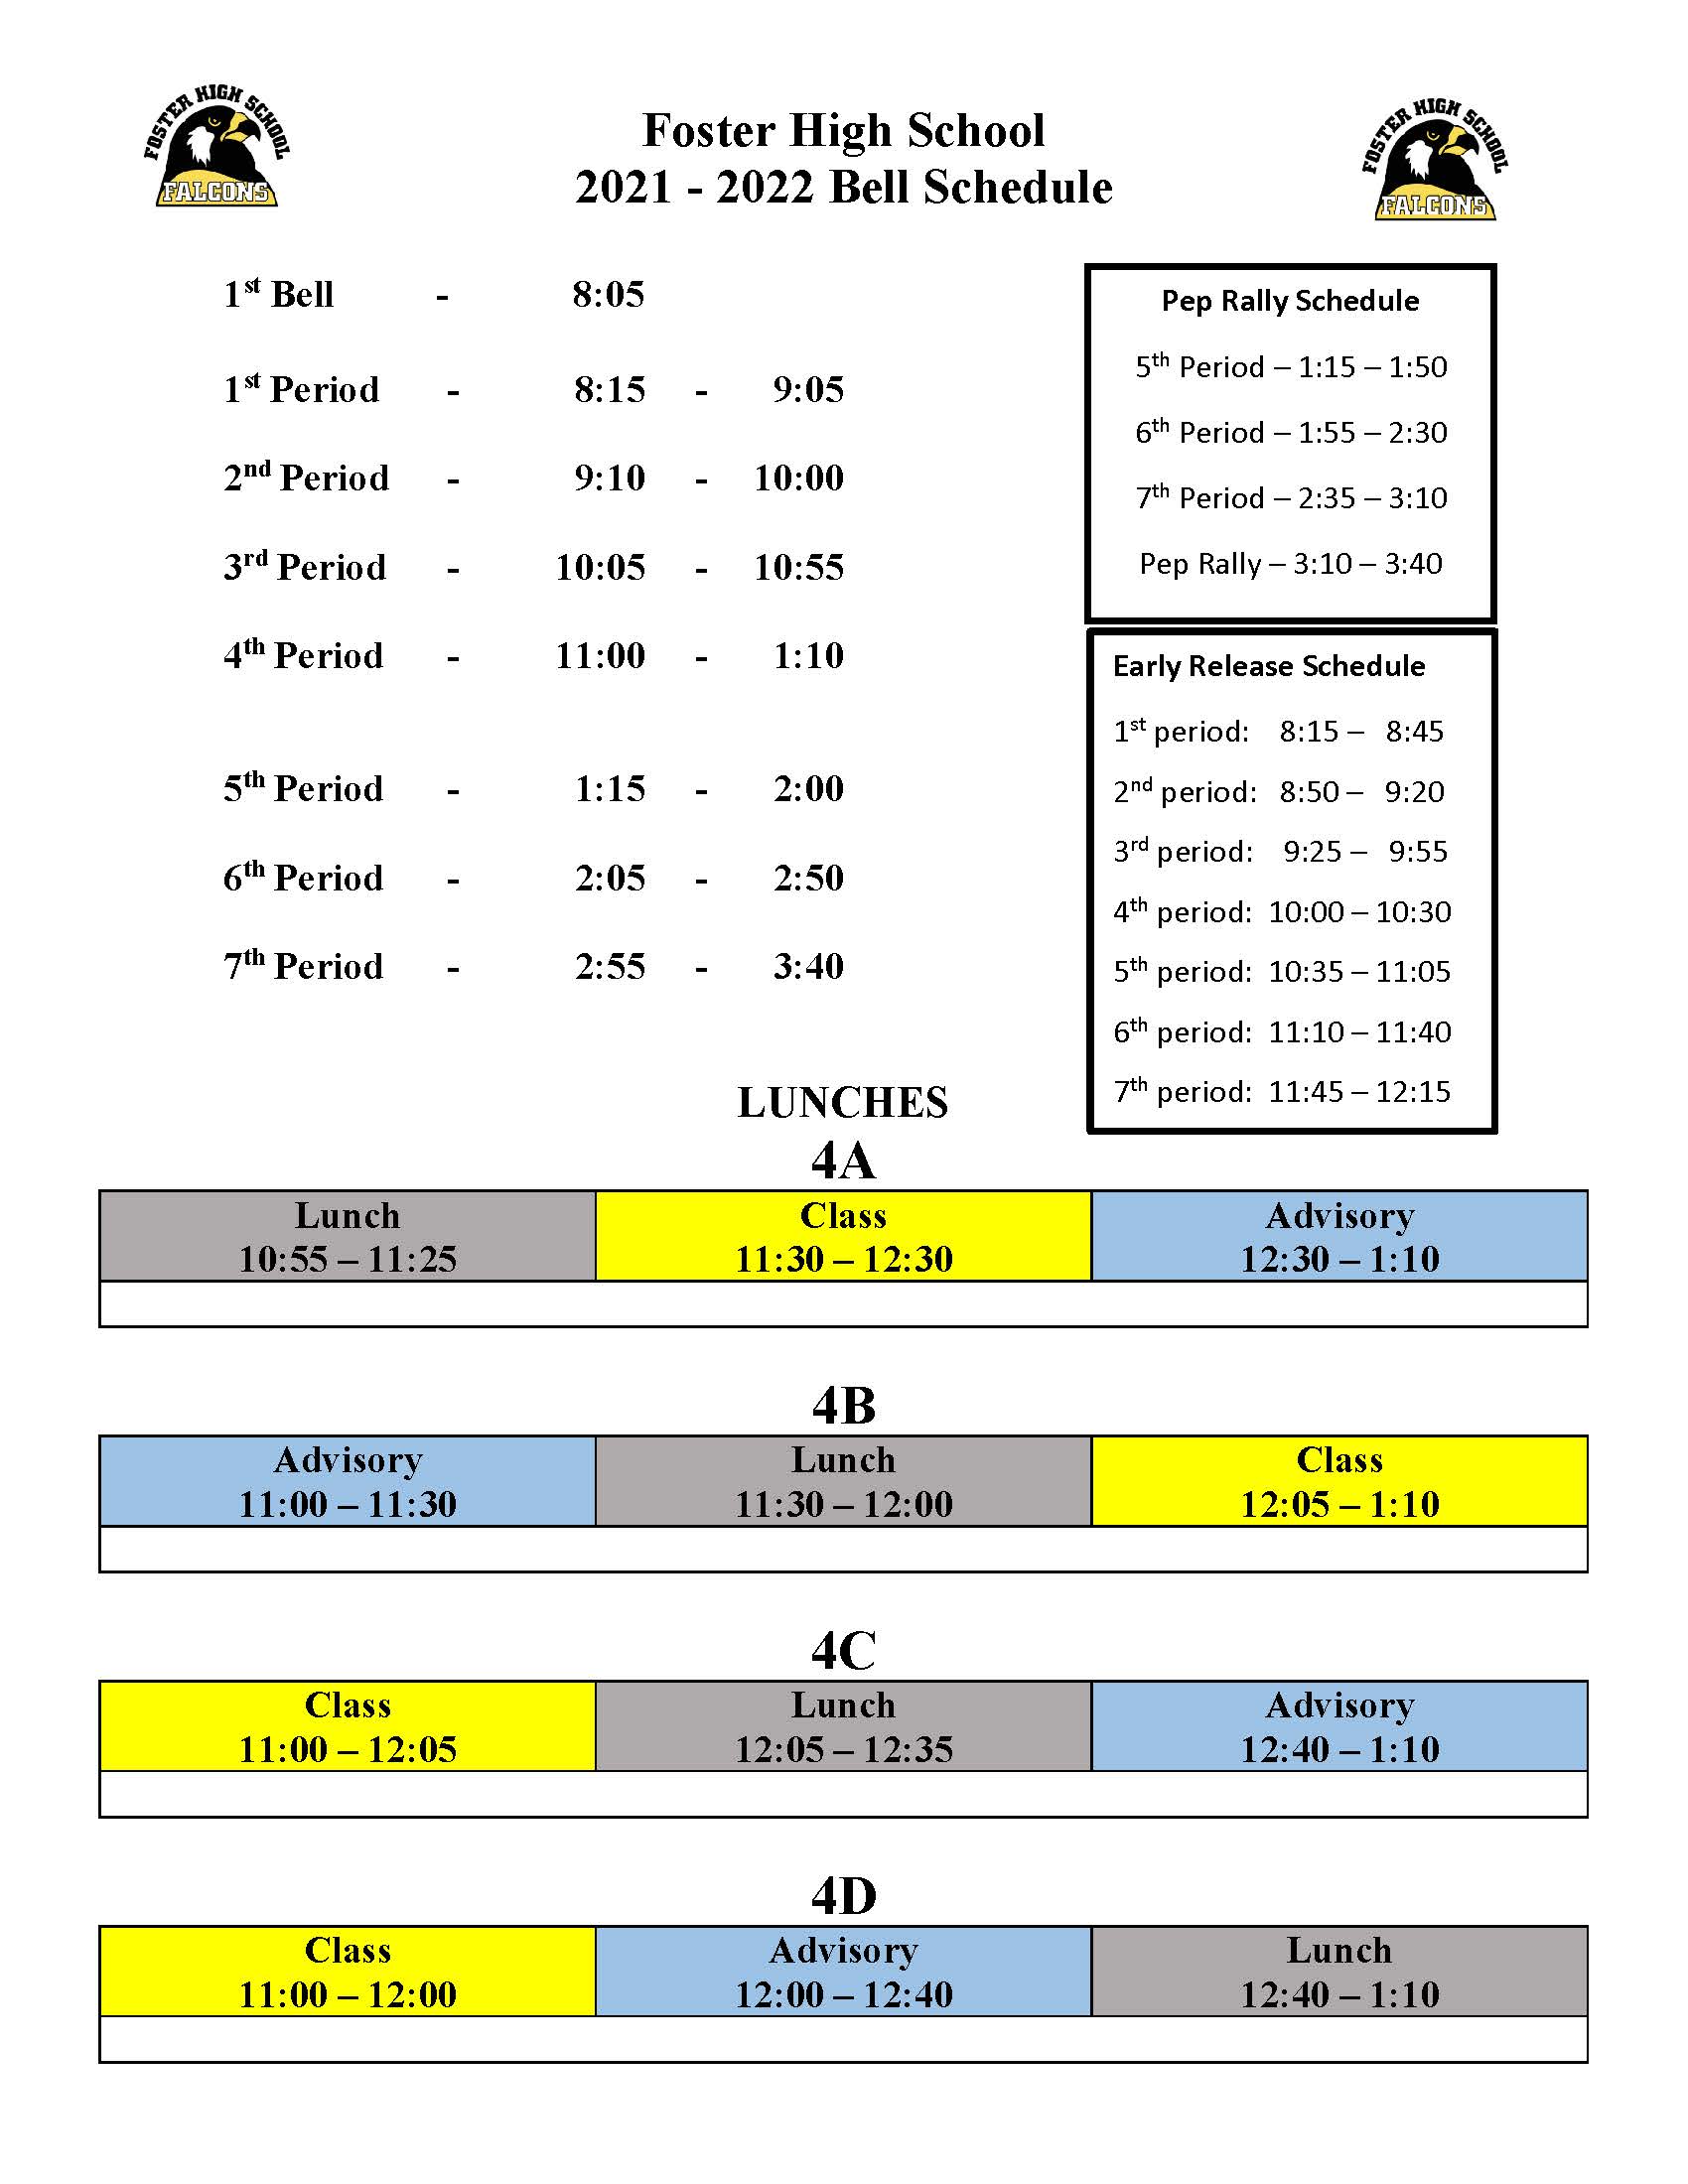 UPDATED 21-22 Bell Schedule_Page_1